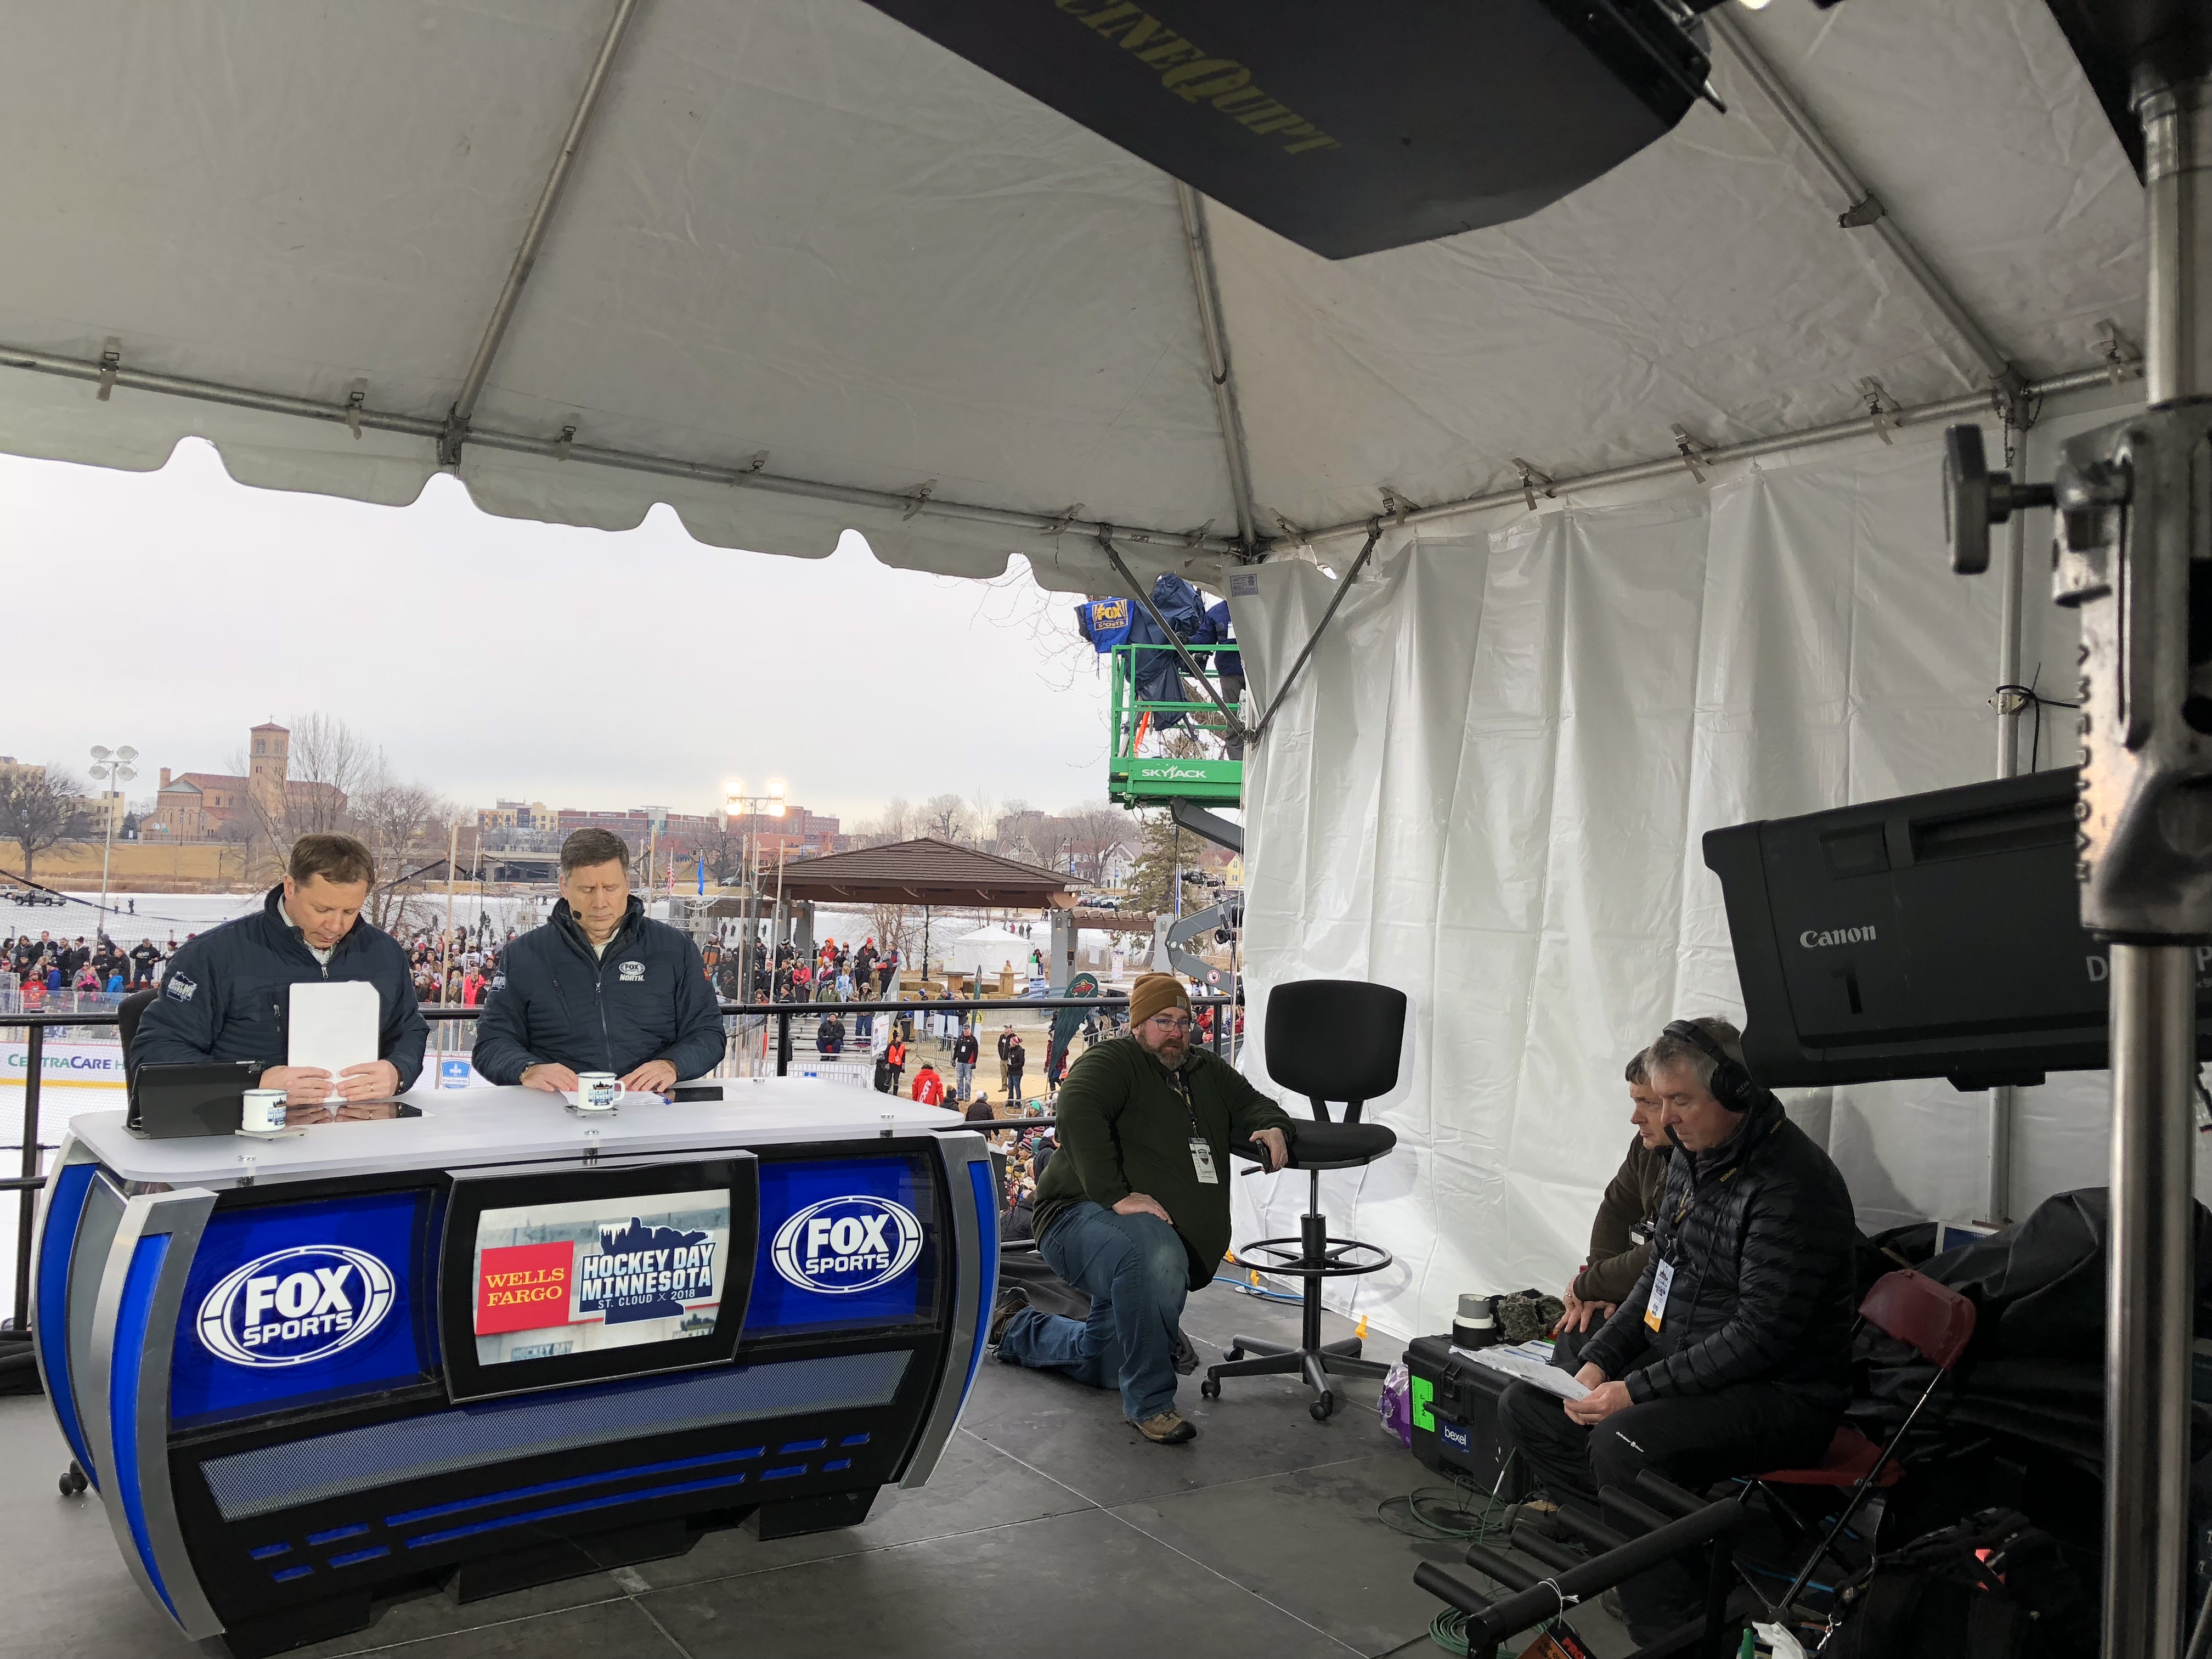 Fox Sports North Delivers Its Super Bowl With Th Annual Hockey Day Minnesota